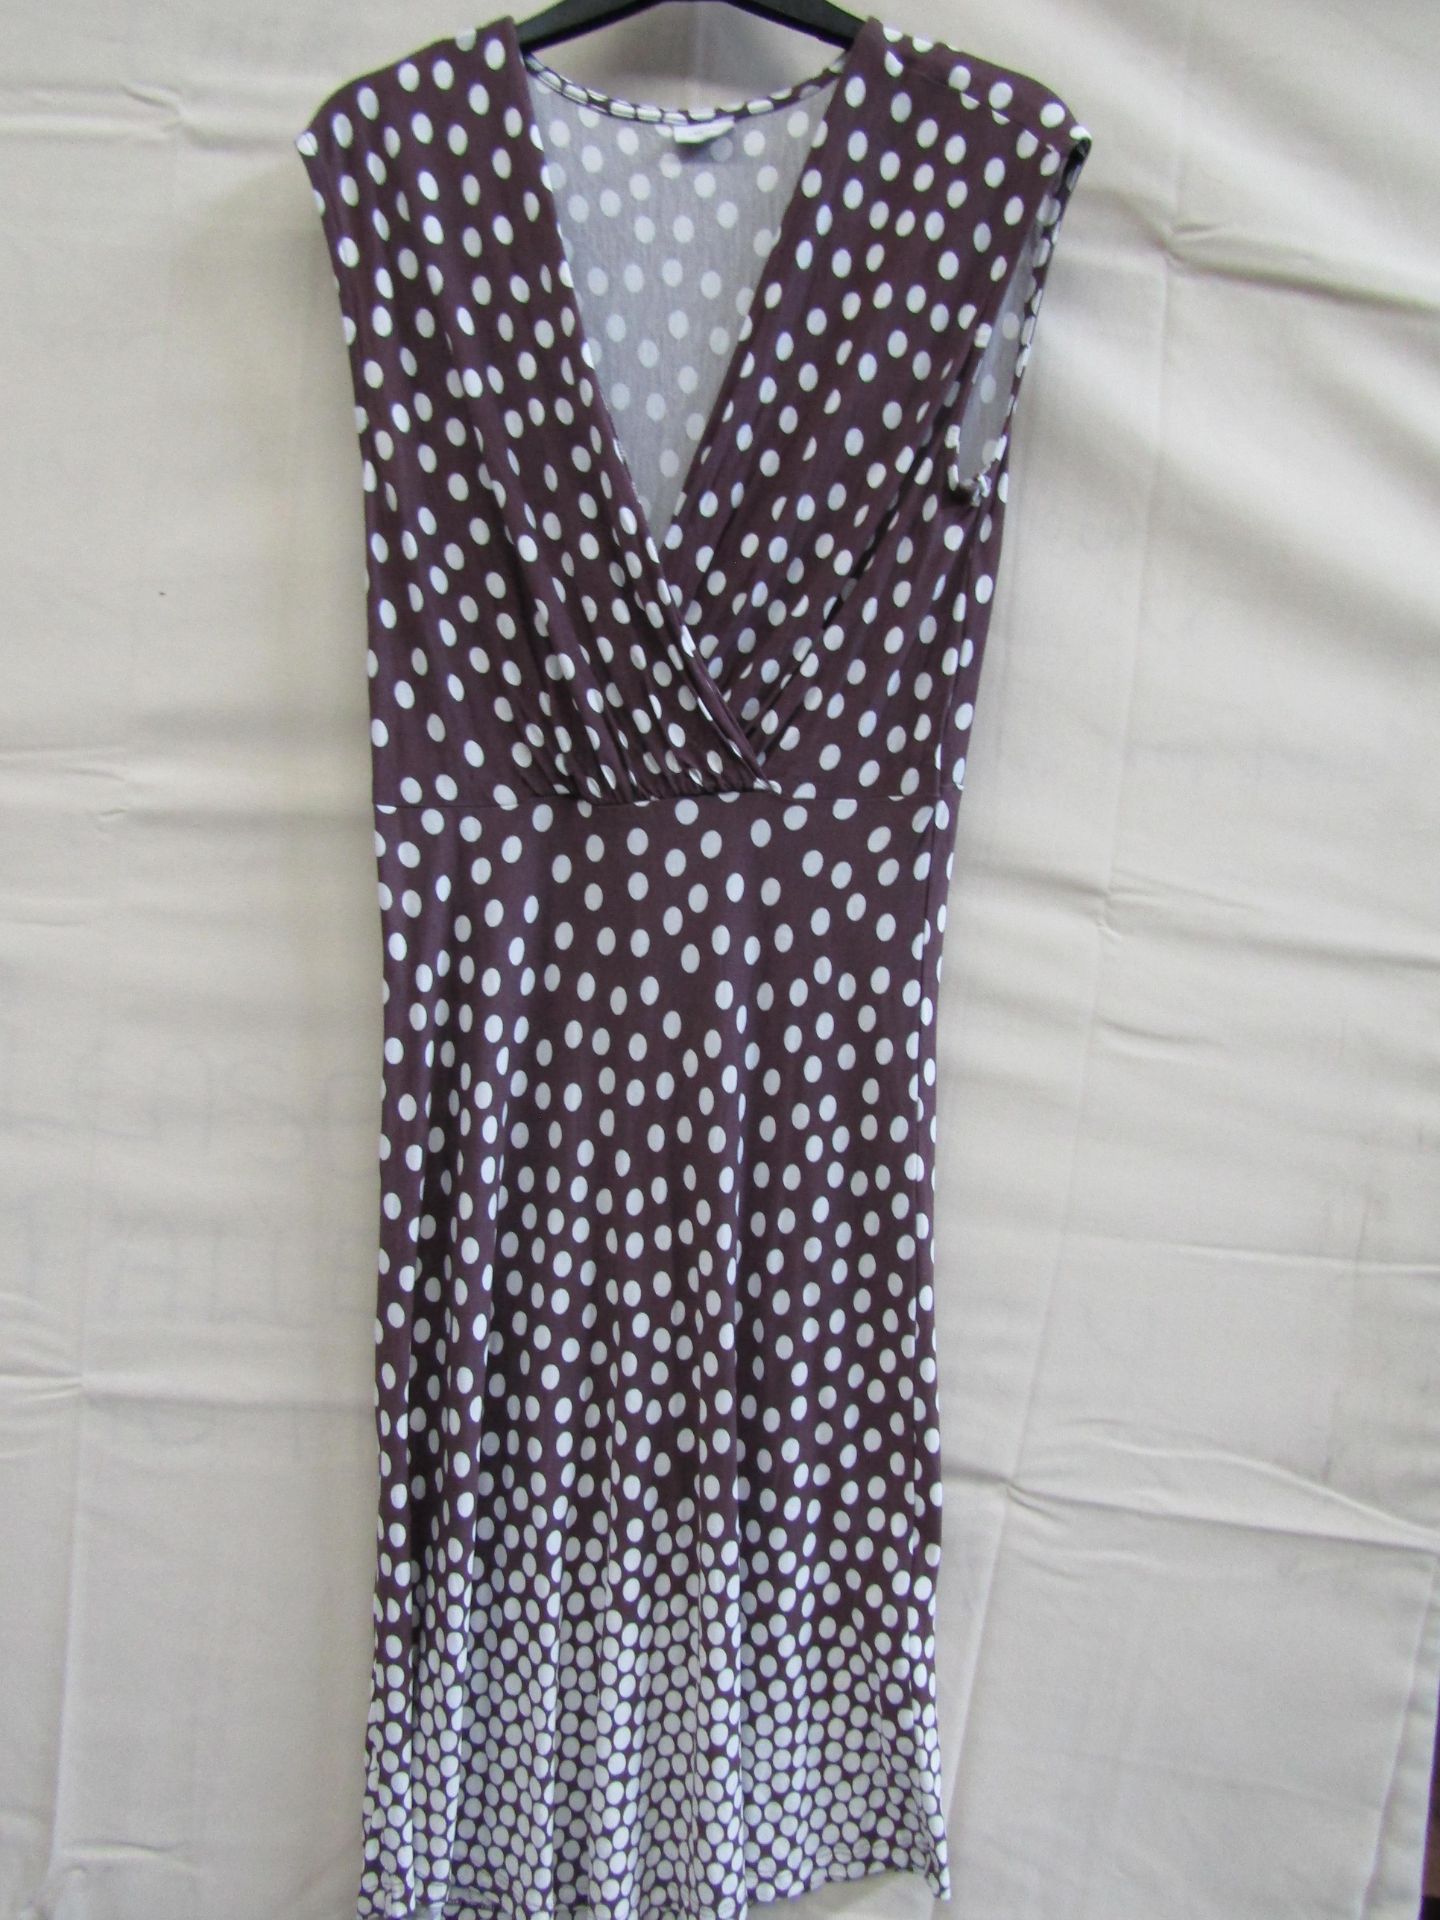 Lascana Brown Spotted Dress Size 14 ) May Have Been Worn No Tags Attatched